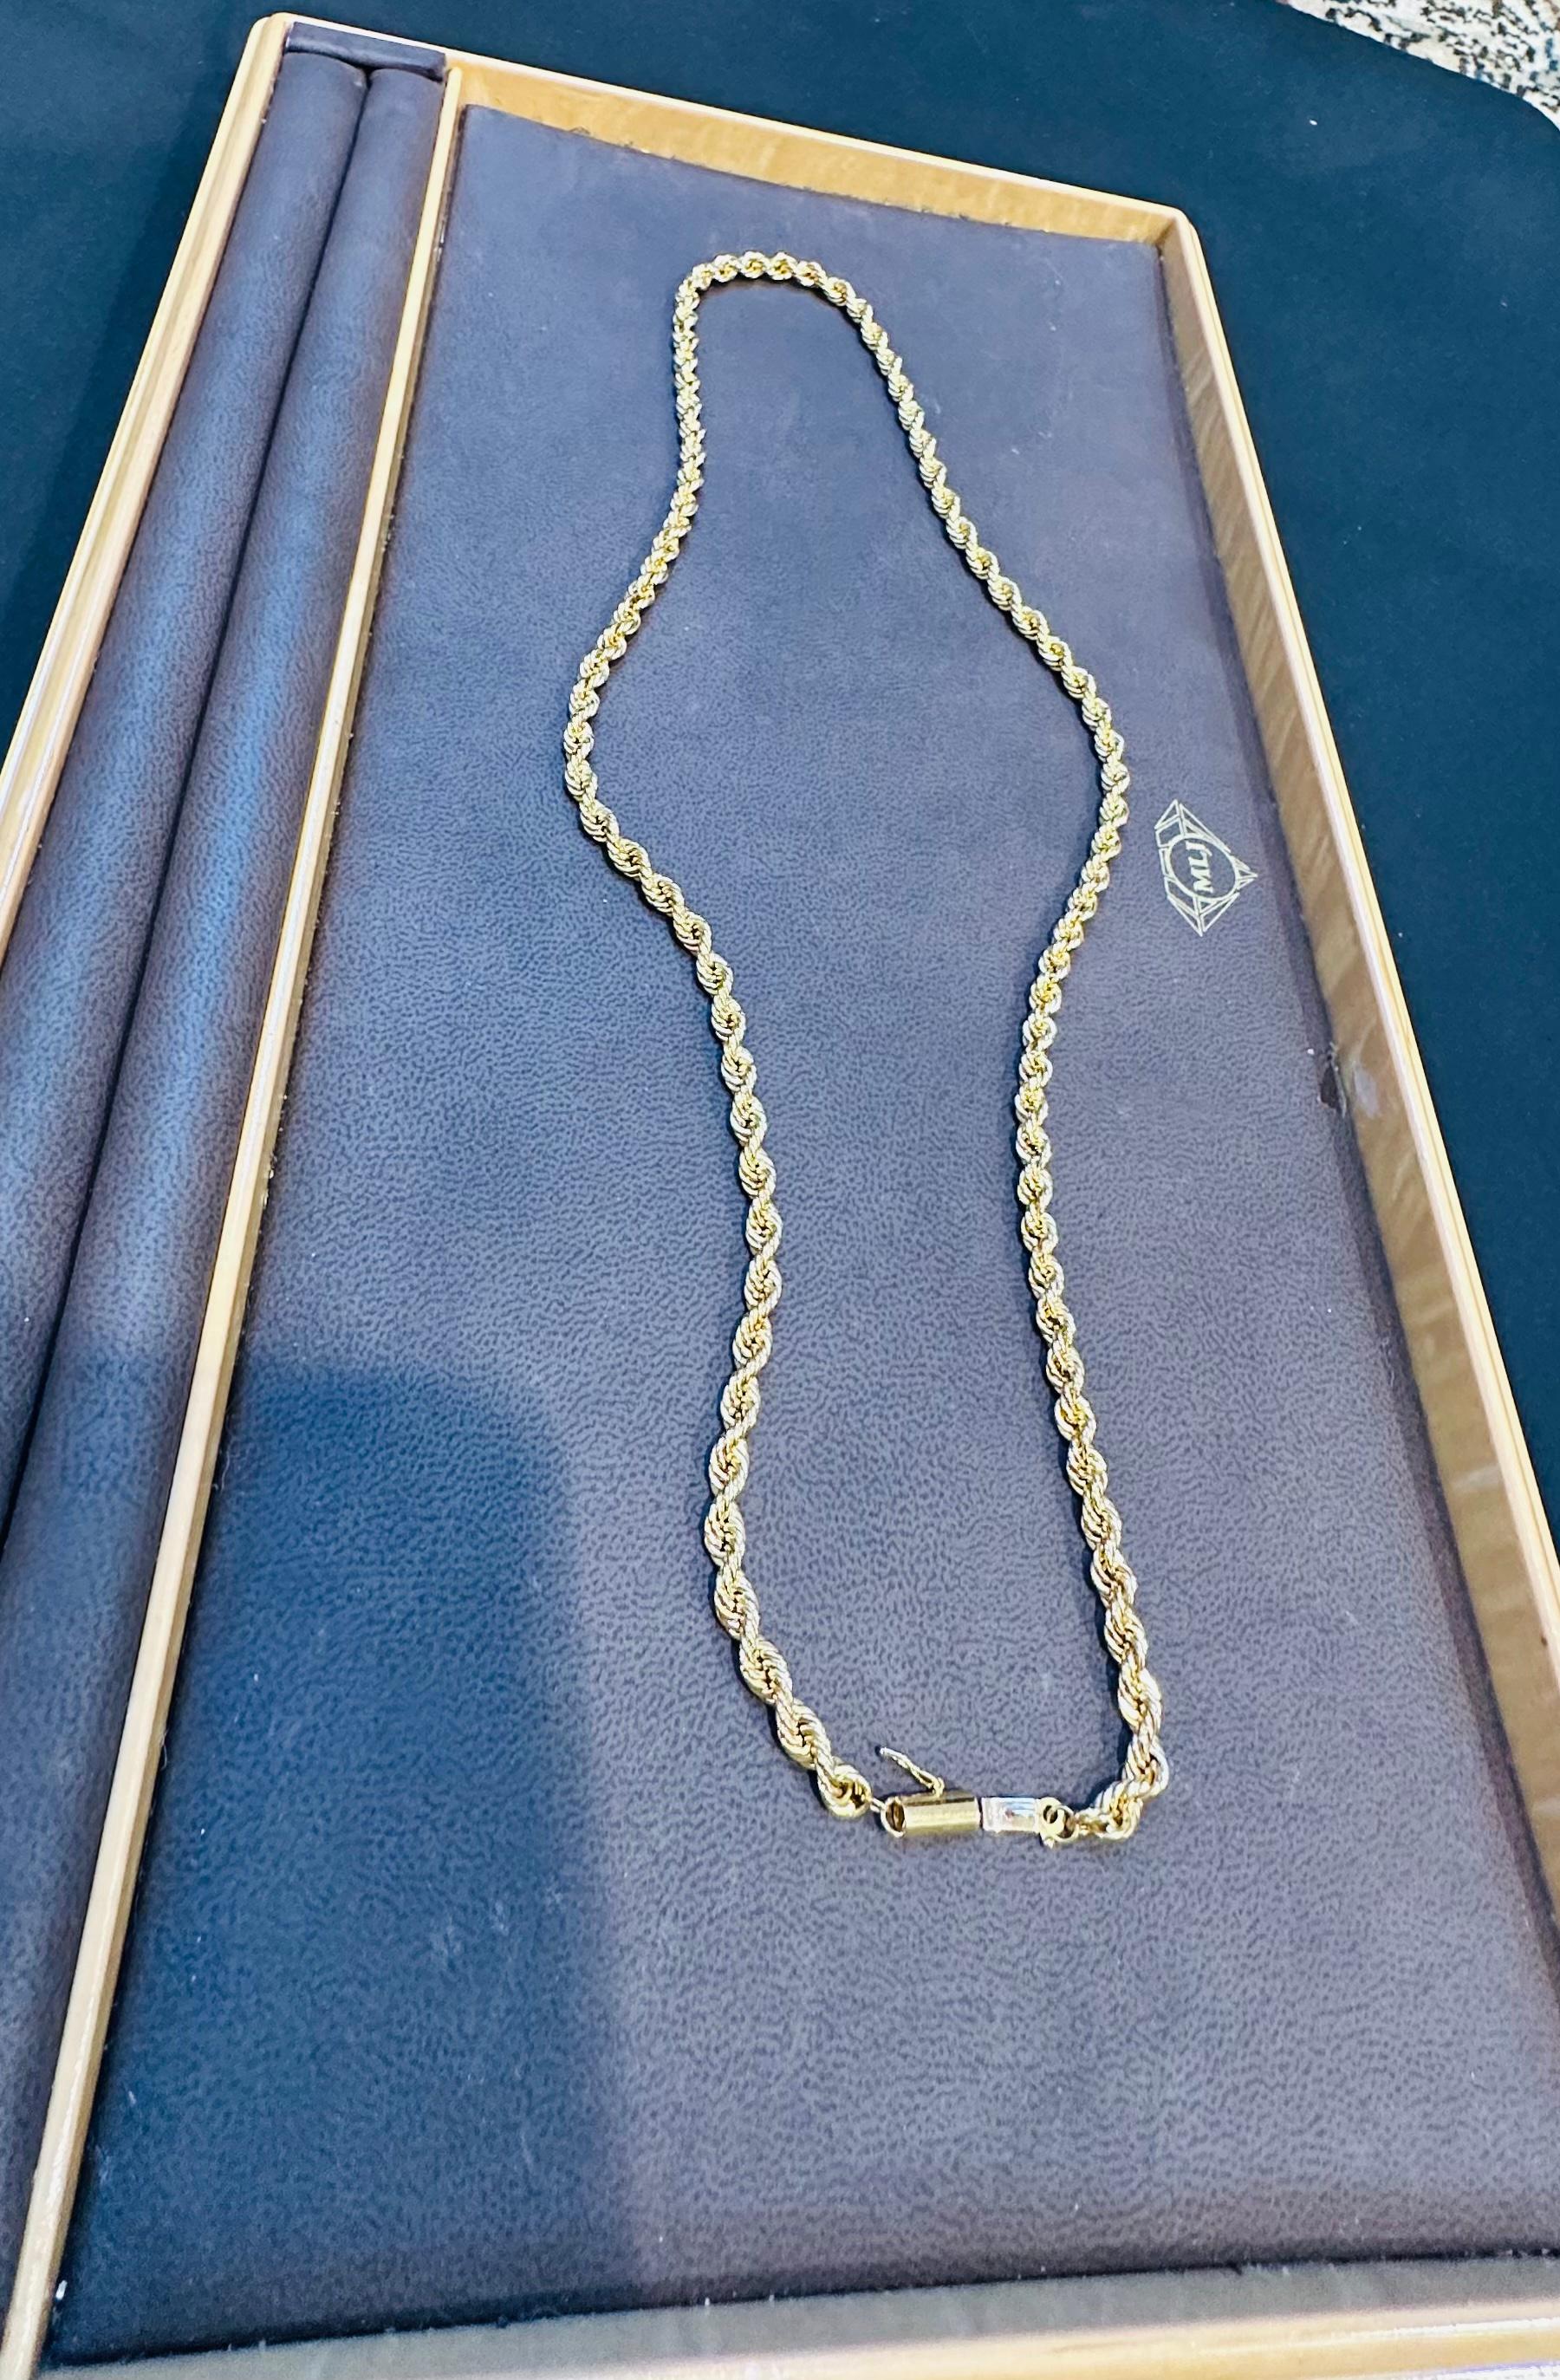 Vintage 14 Karat Yellow Gold 17 Gm, Rope Chain Necklace, 24 Inch long For Sale 6